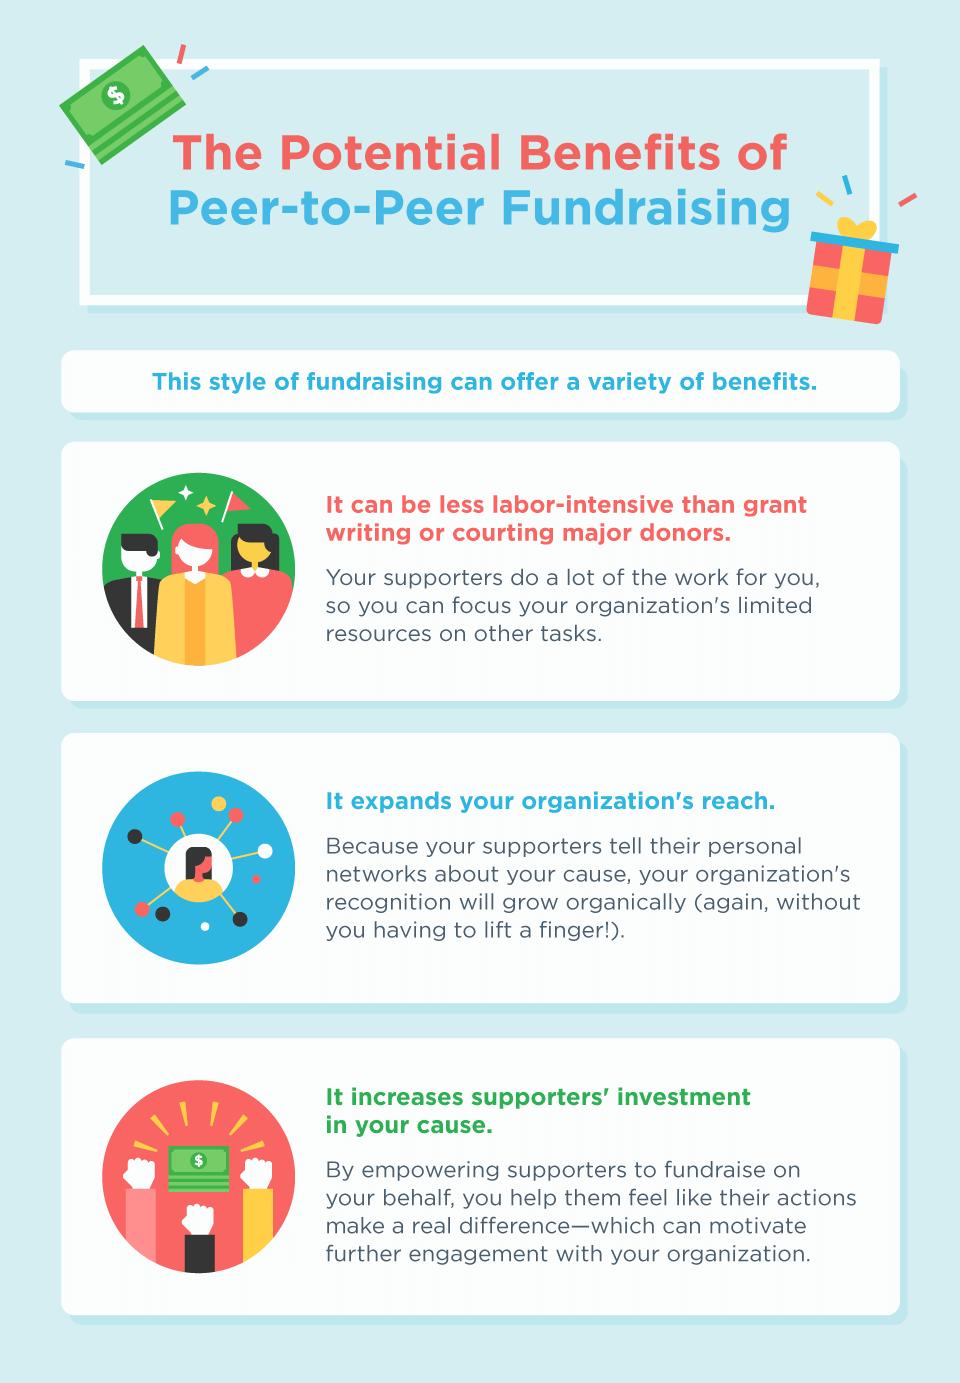 Infographic about the potential benefits of peer-to-peer or P2P fundraising for nonprofits